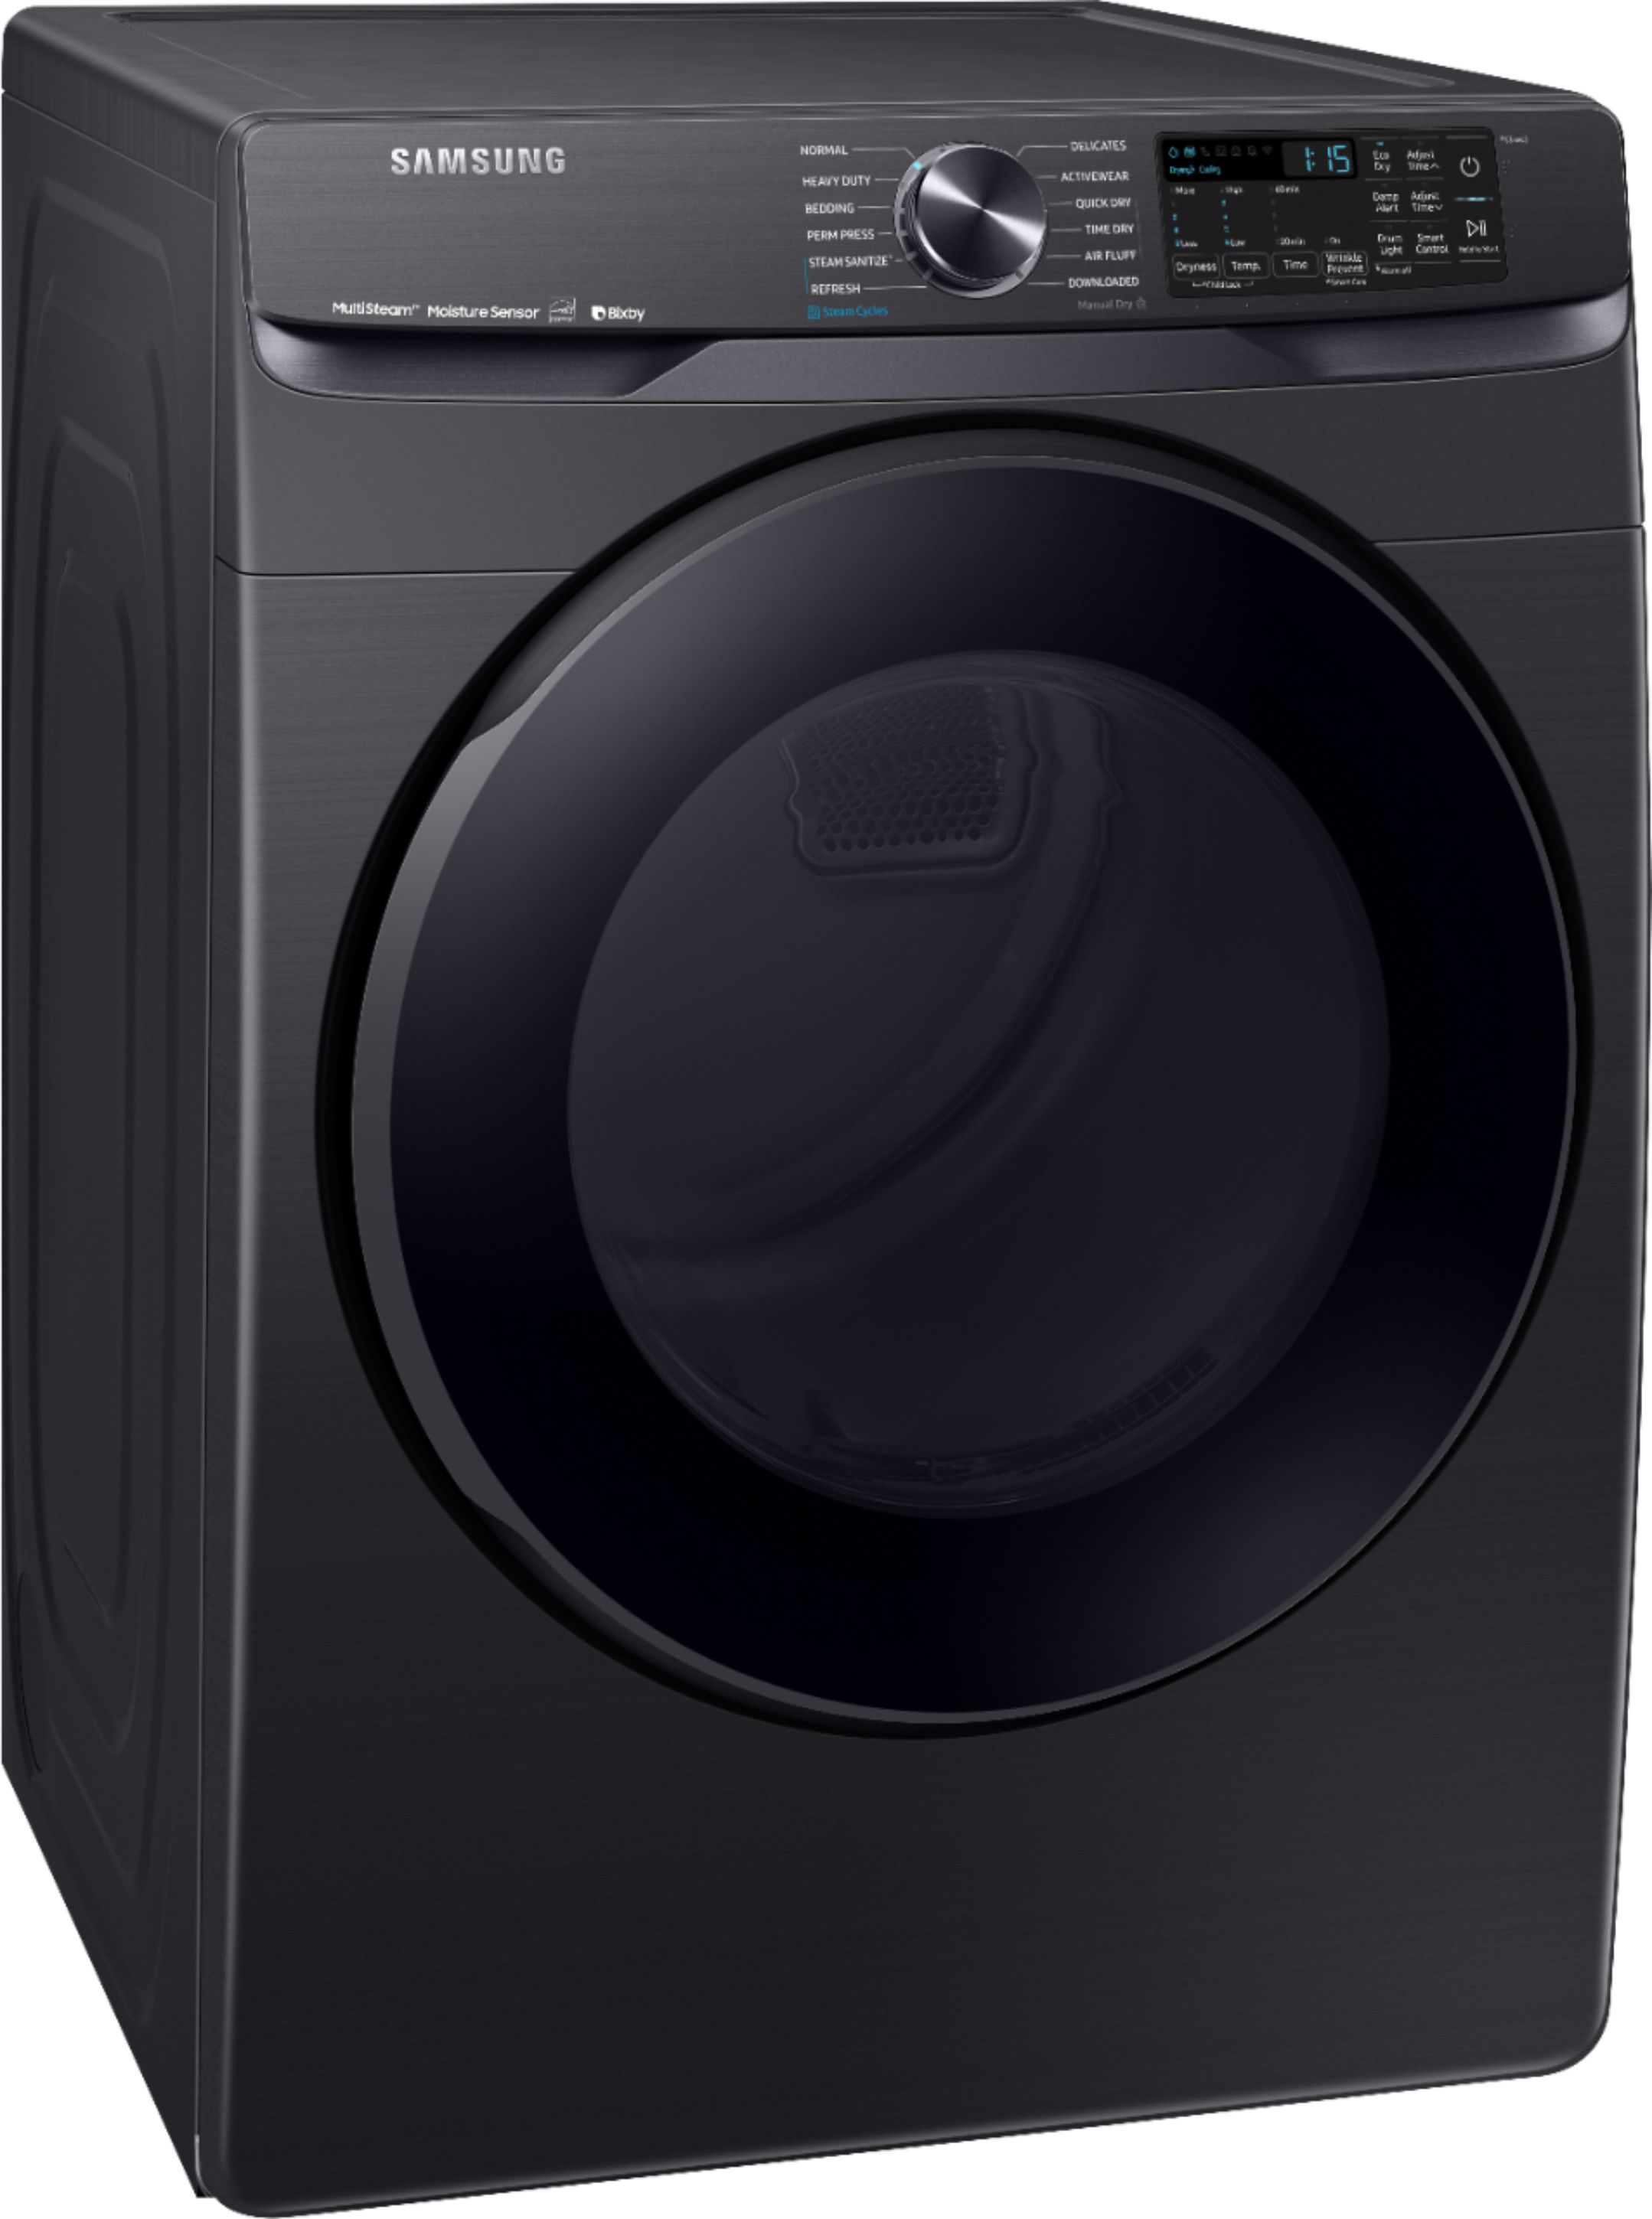 Angle View: Samsung - 7.5 Cu. Ft. Stackable Smart Electric Dryer with Steam and Sensor Dry - Black stainless steel